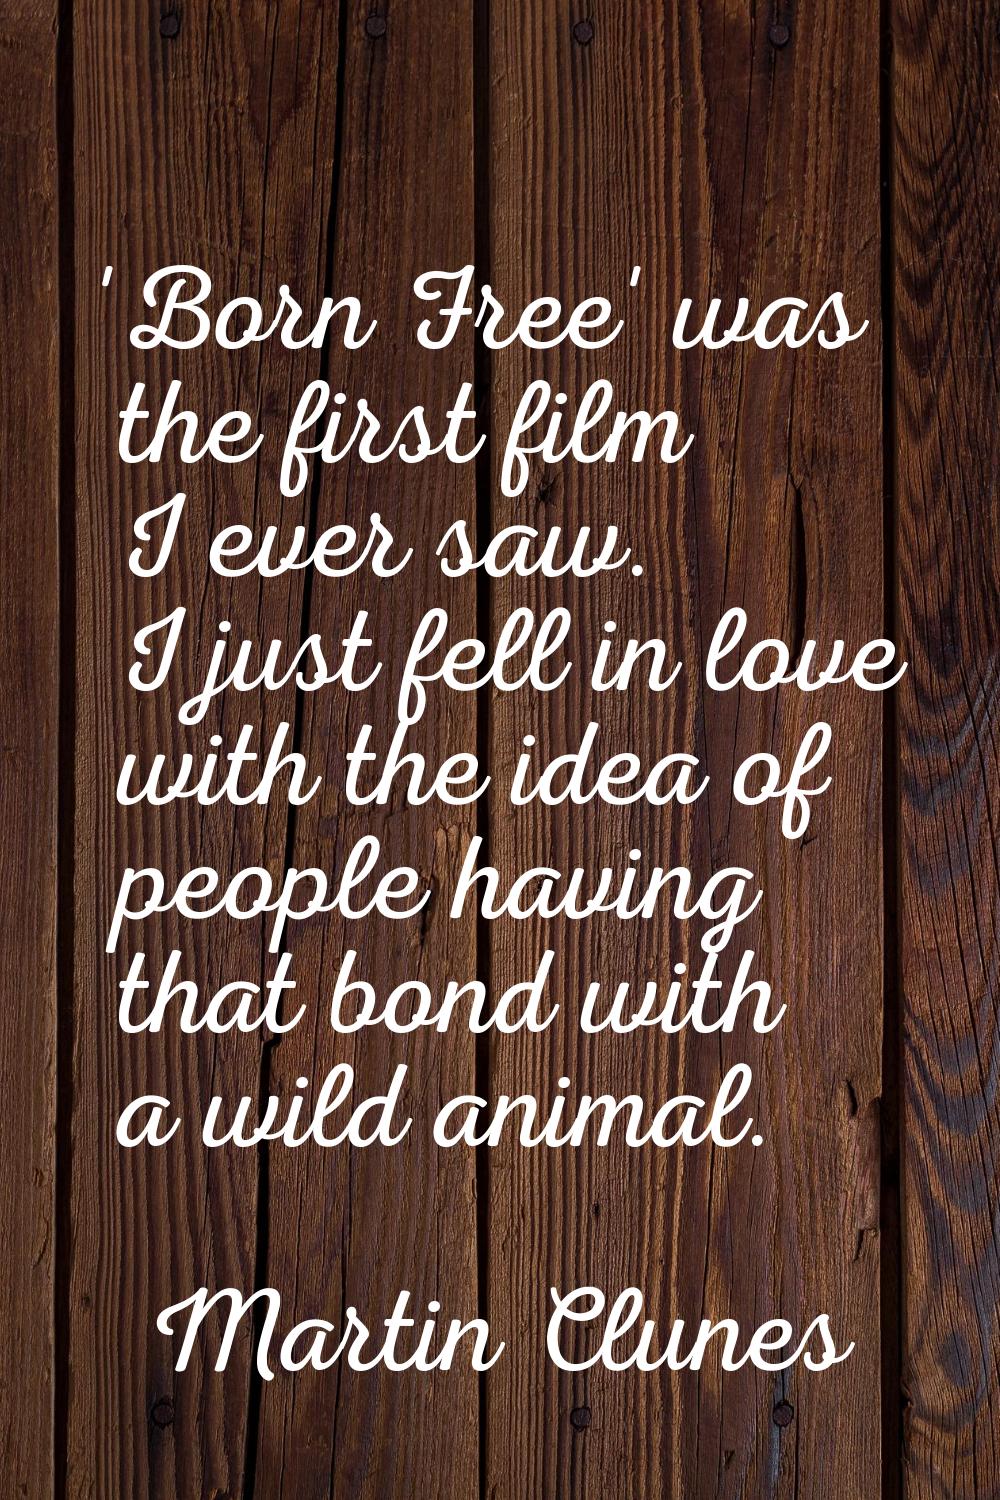 'Born Free' was the first film I ever saw. I just fell in love with the idea of people having that 